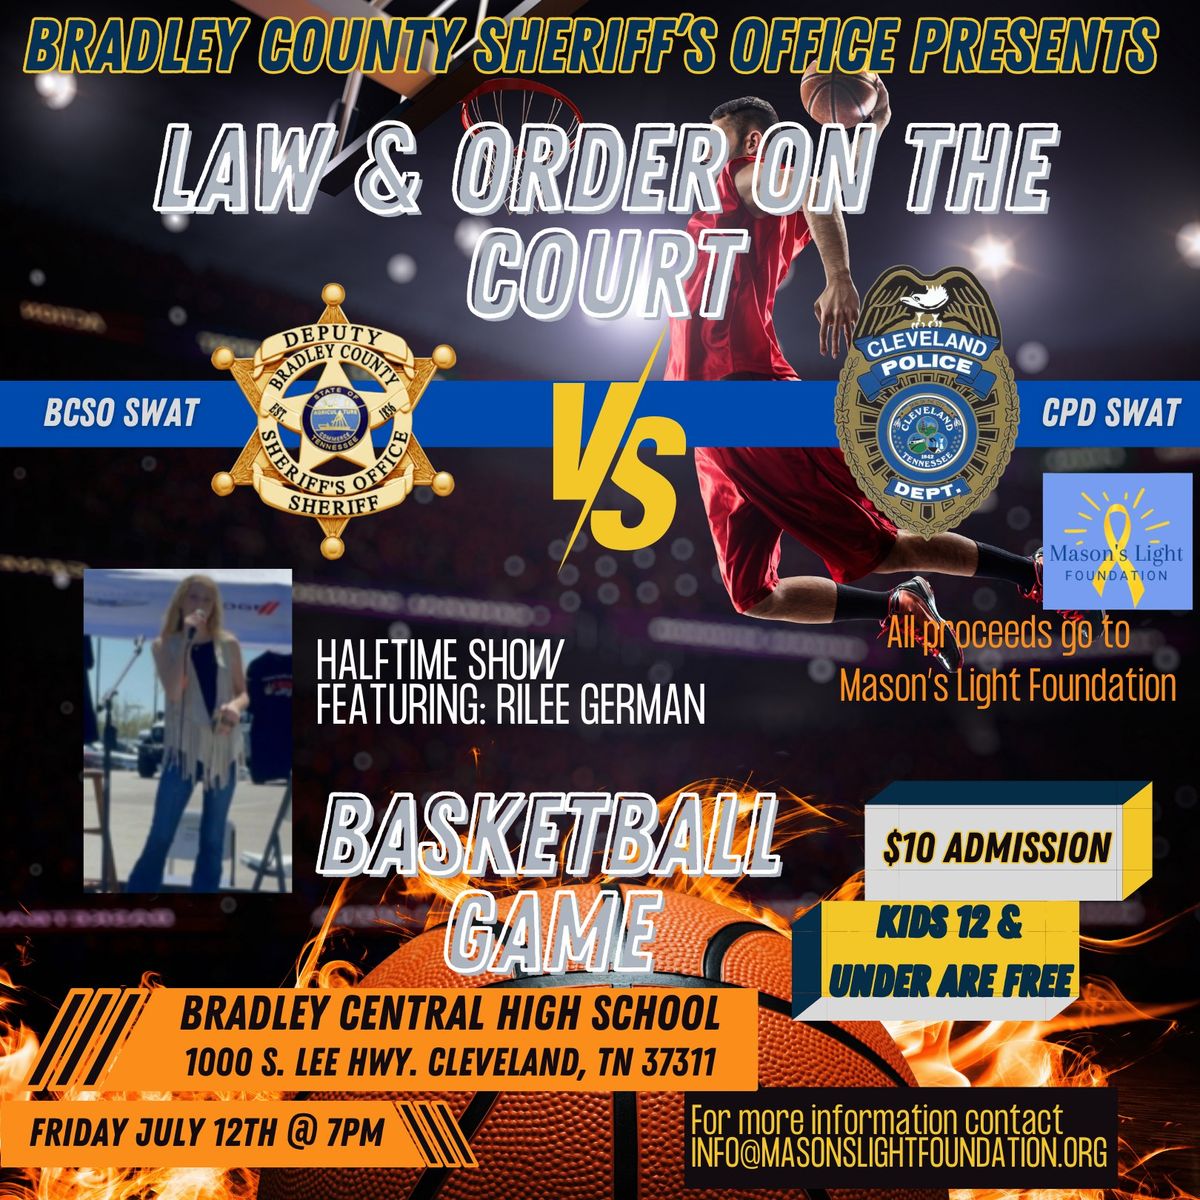 LAW & ORDER ON THE COURT